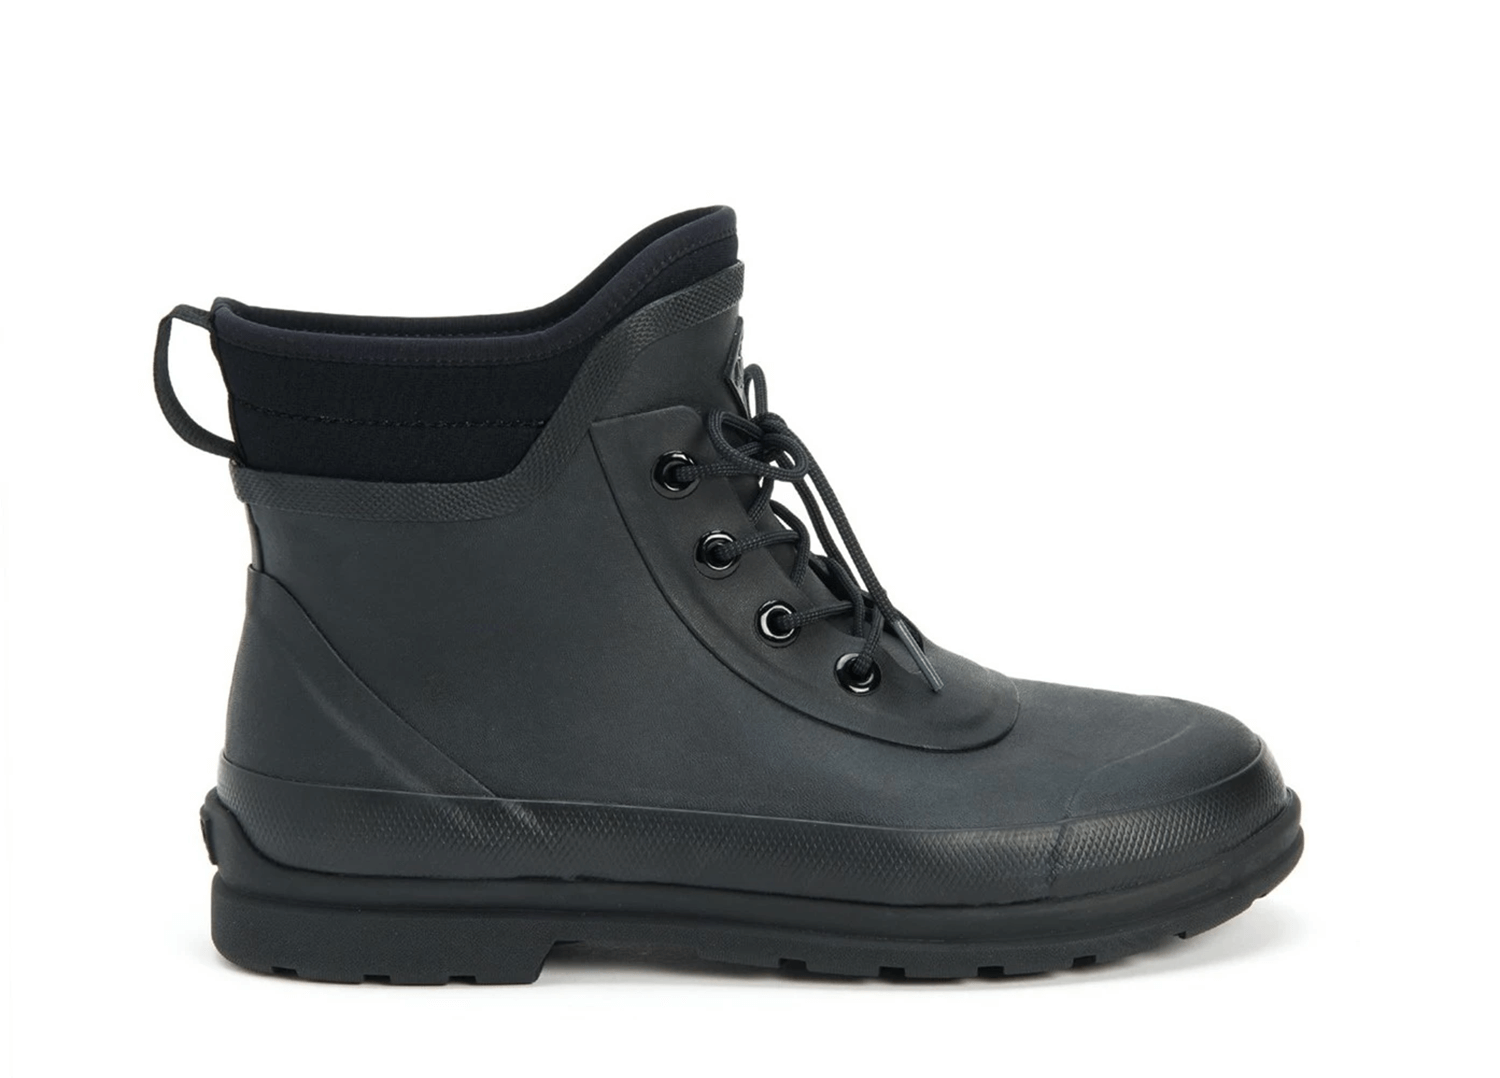 Muck Boot Original Ladies' Lace-Up Ankle Boots in Black - £95 ...